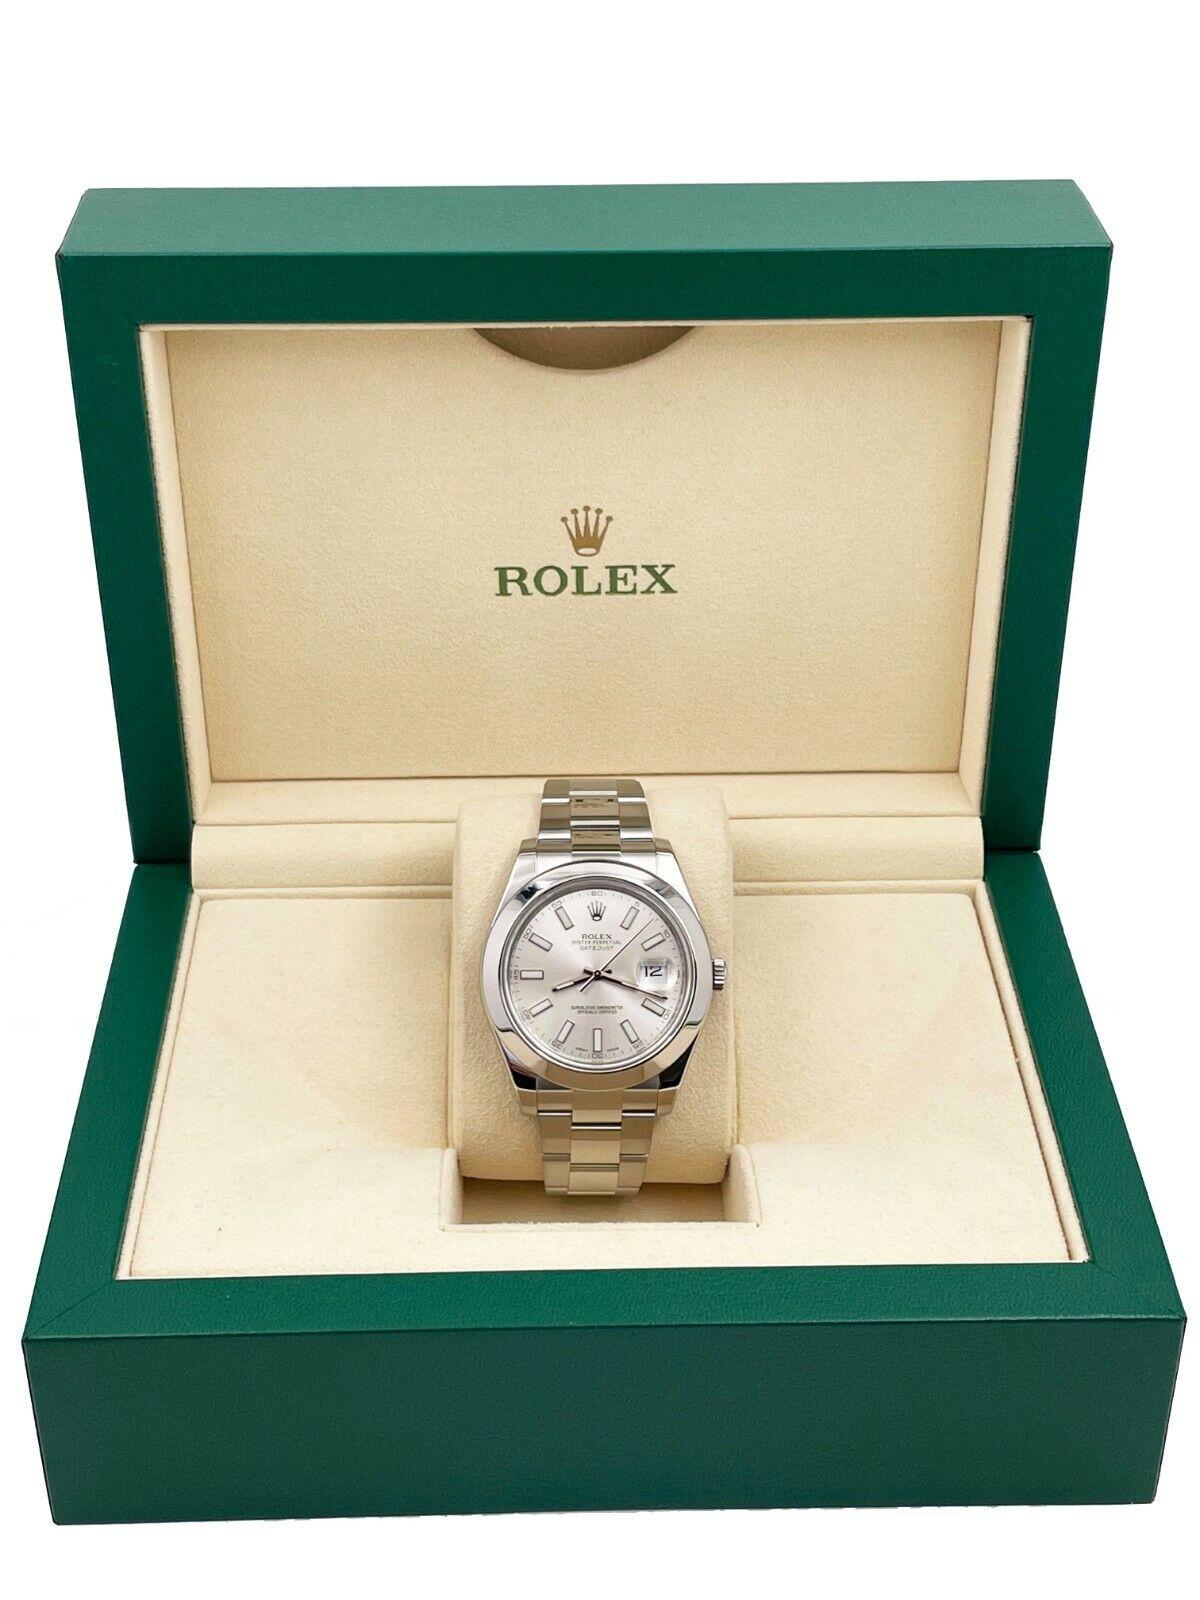 Rolex 116300 Datejust II Silver Dial Stainless Steel 1